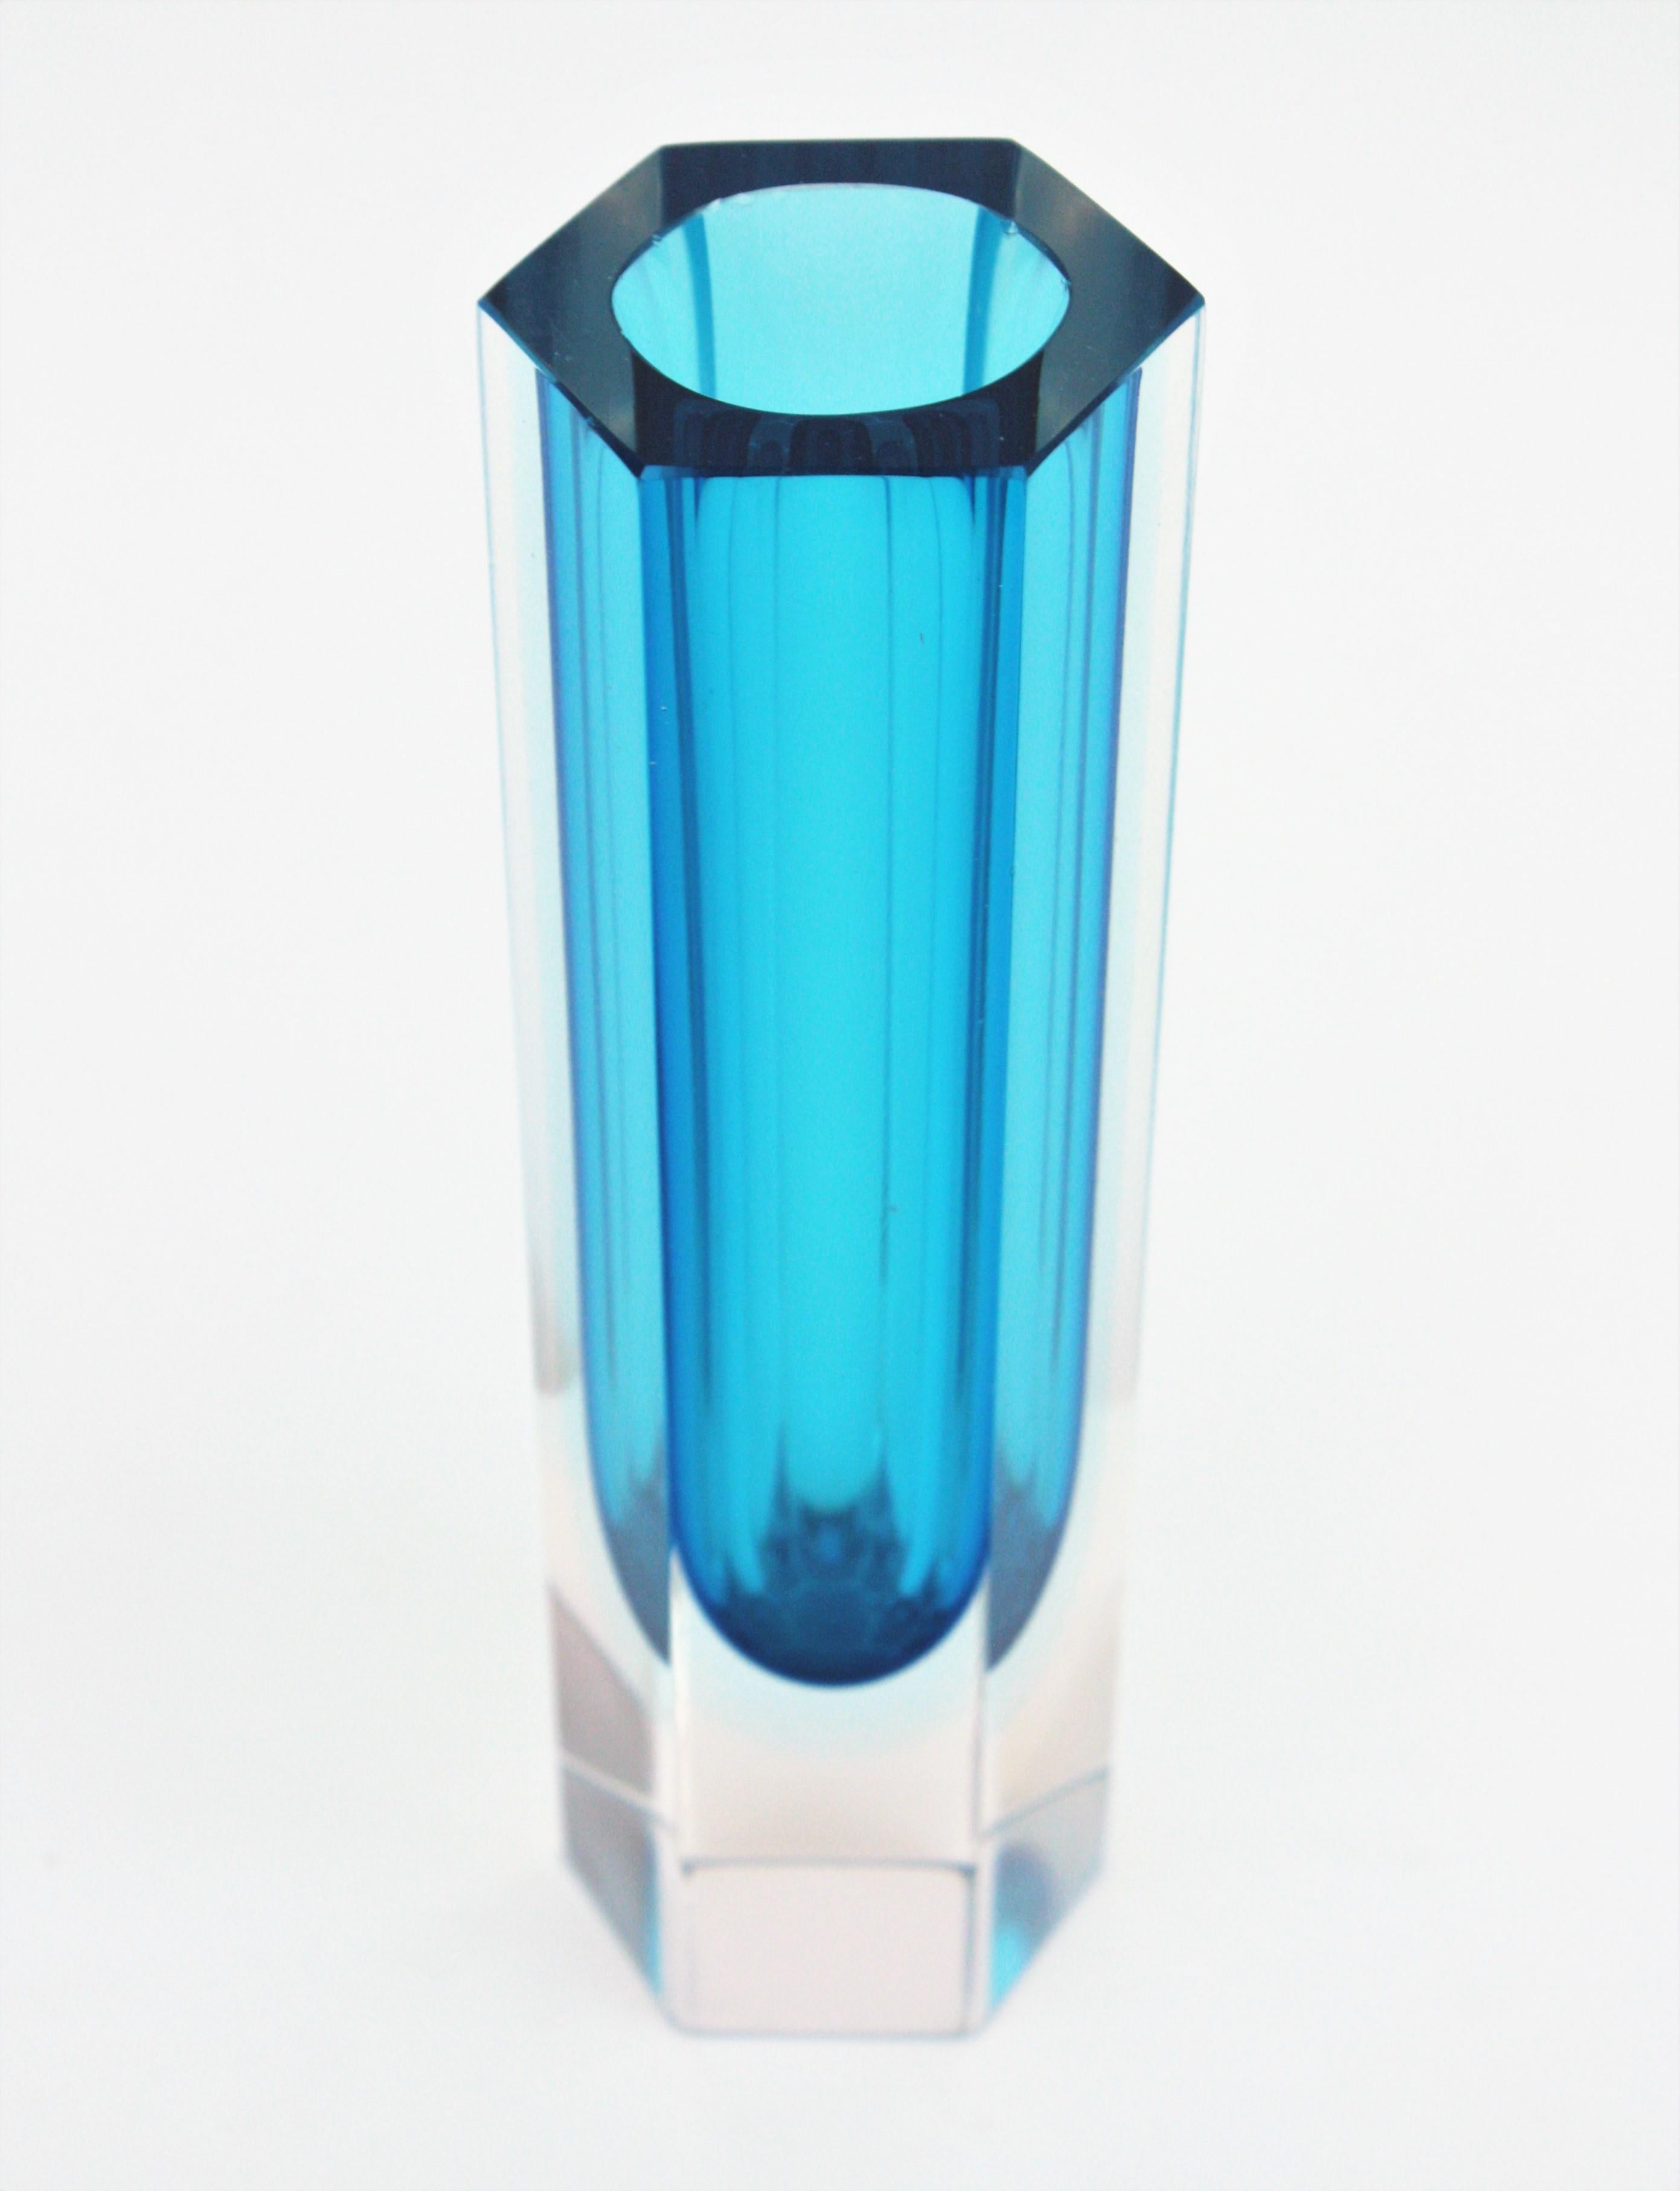 A cool midcentury blue and clear Sommerso glass hexagonal faceted vase. Attributed to Mandruzzato, Italy, 1960s.
Blue glass with a layer of deep blue glass summerged into clear glass.
This eye-catching vase will be pretty beautiful placed alone but